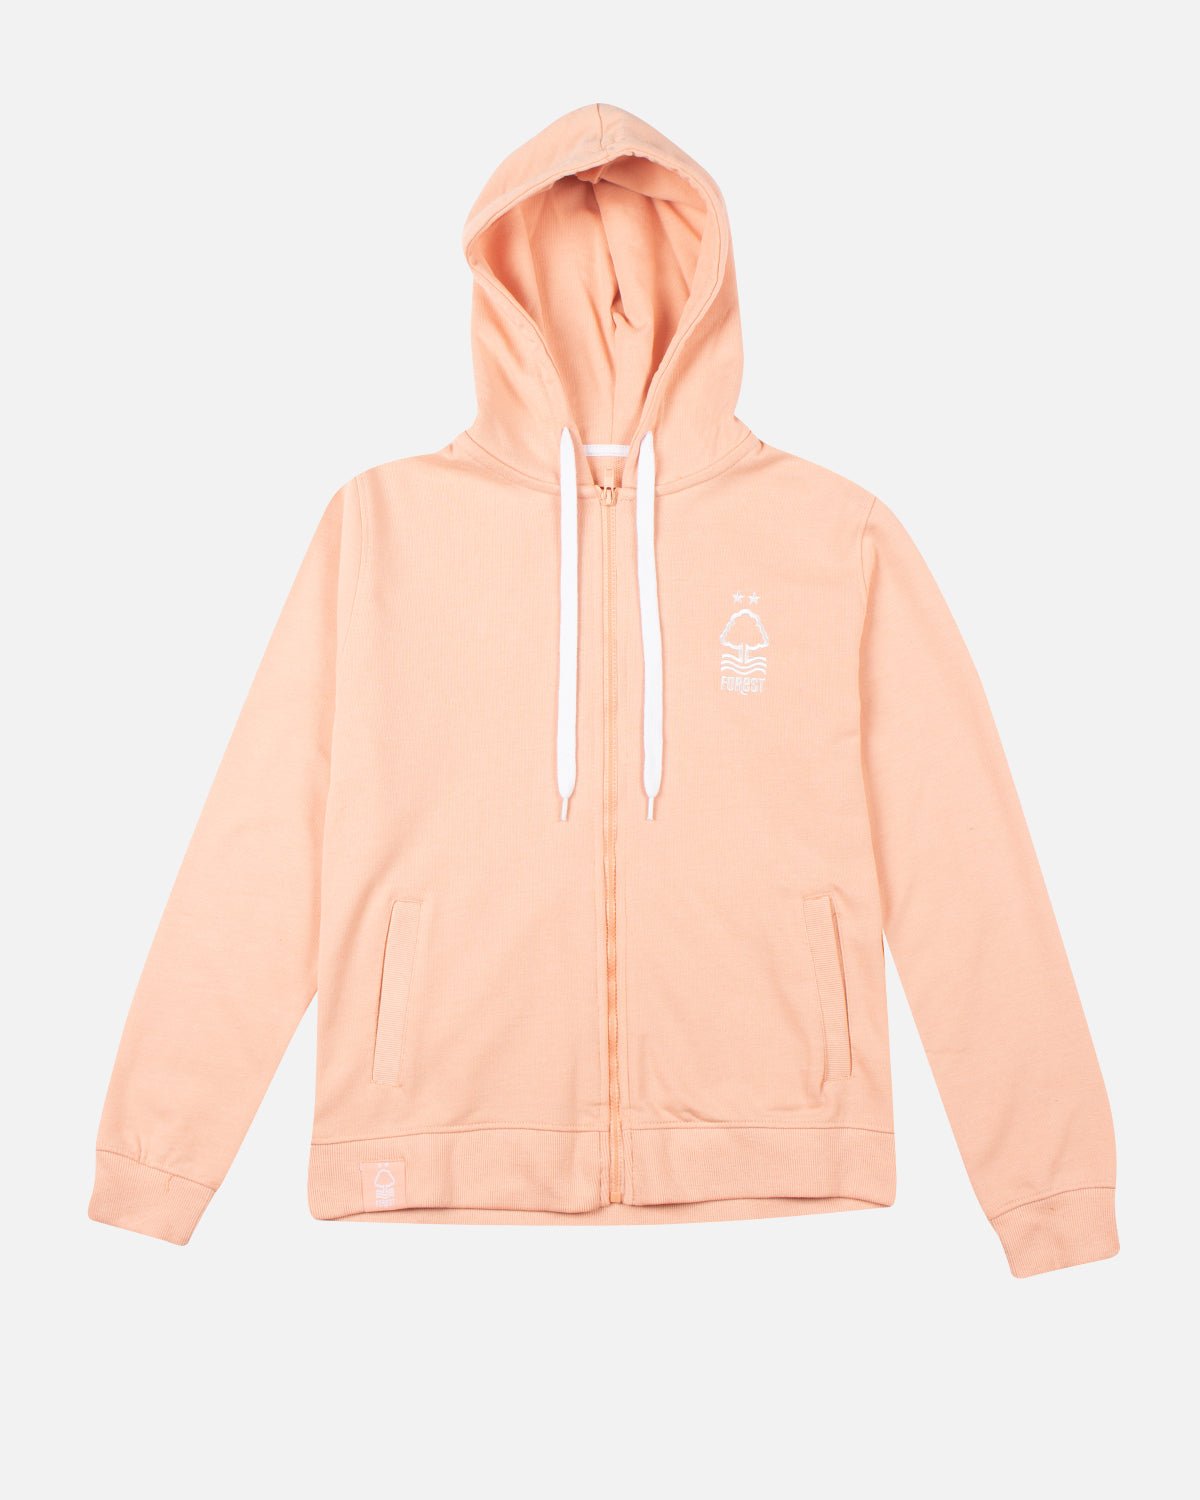 NFFC Womens Apricot Full Zip Hoodie - Nottingham Forest FC